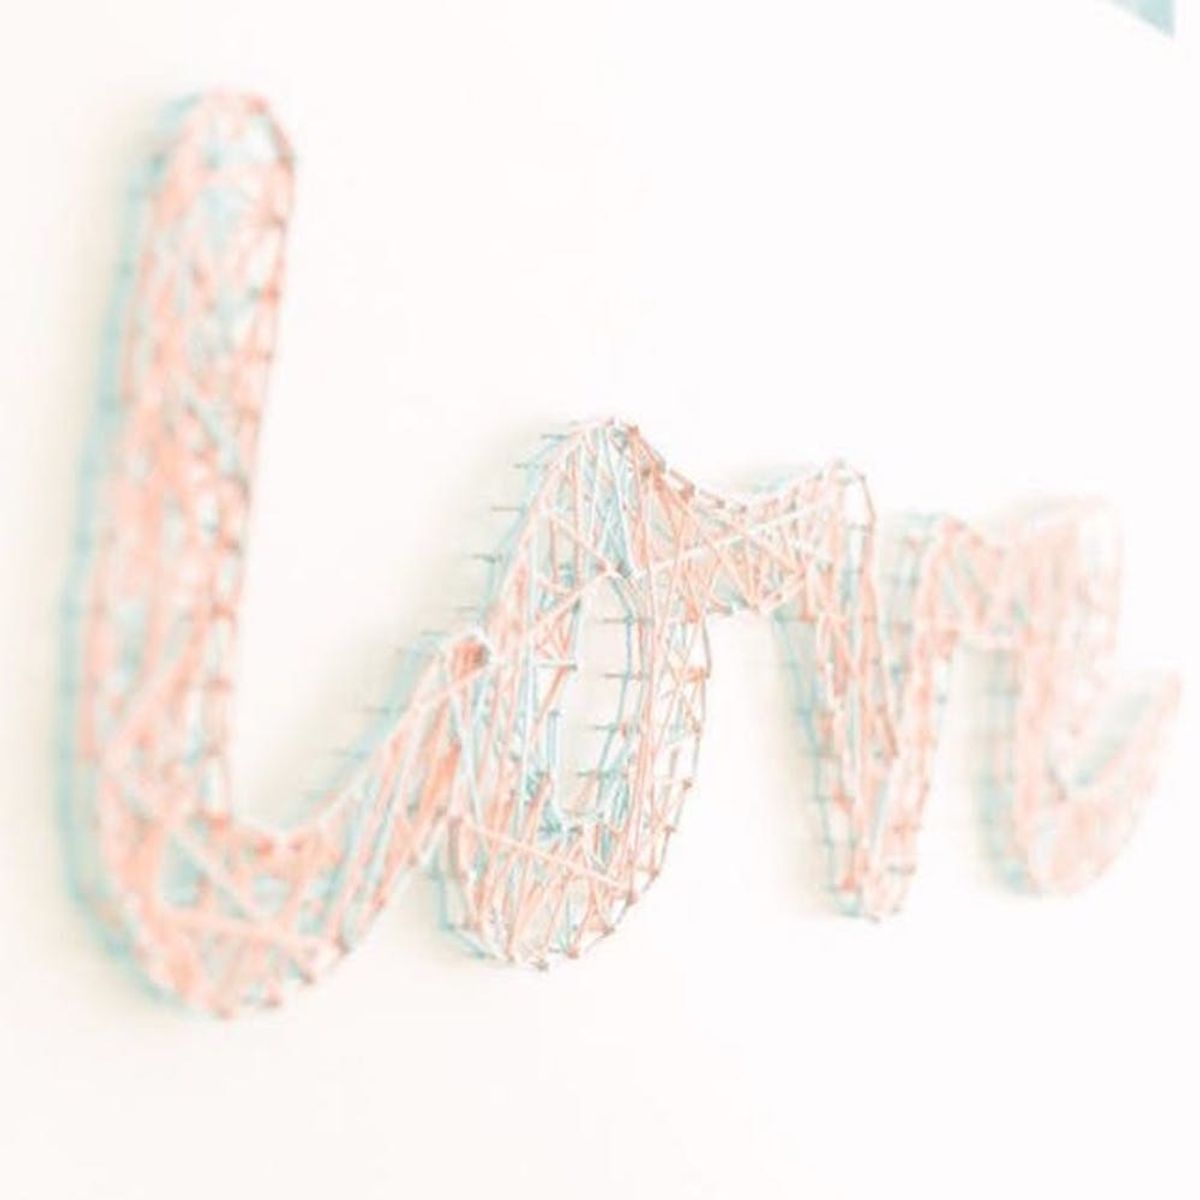 9 Reasons Why String Art Is the Next Big Thing in Wedding Decor